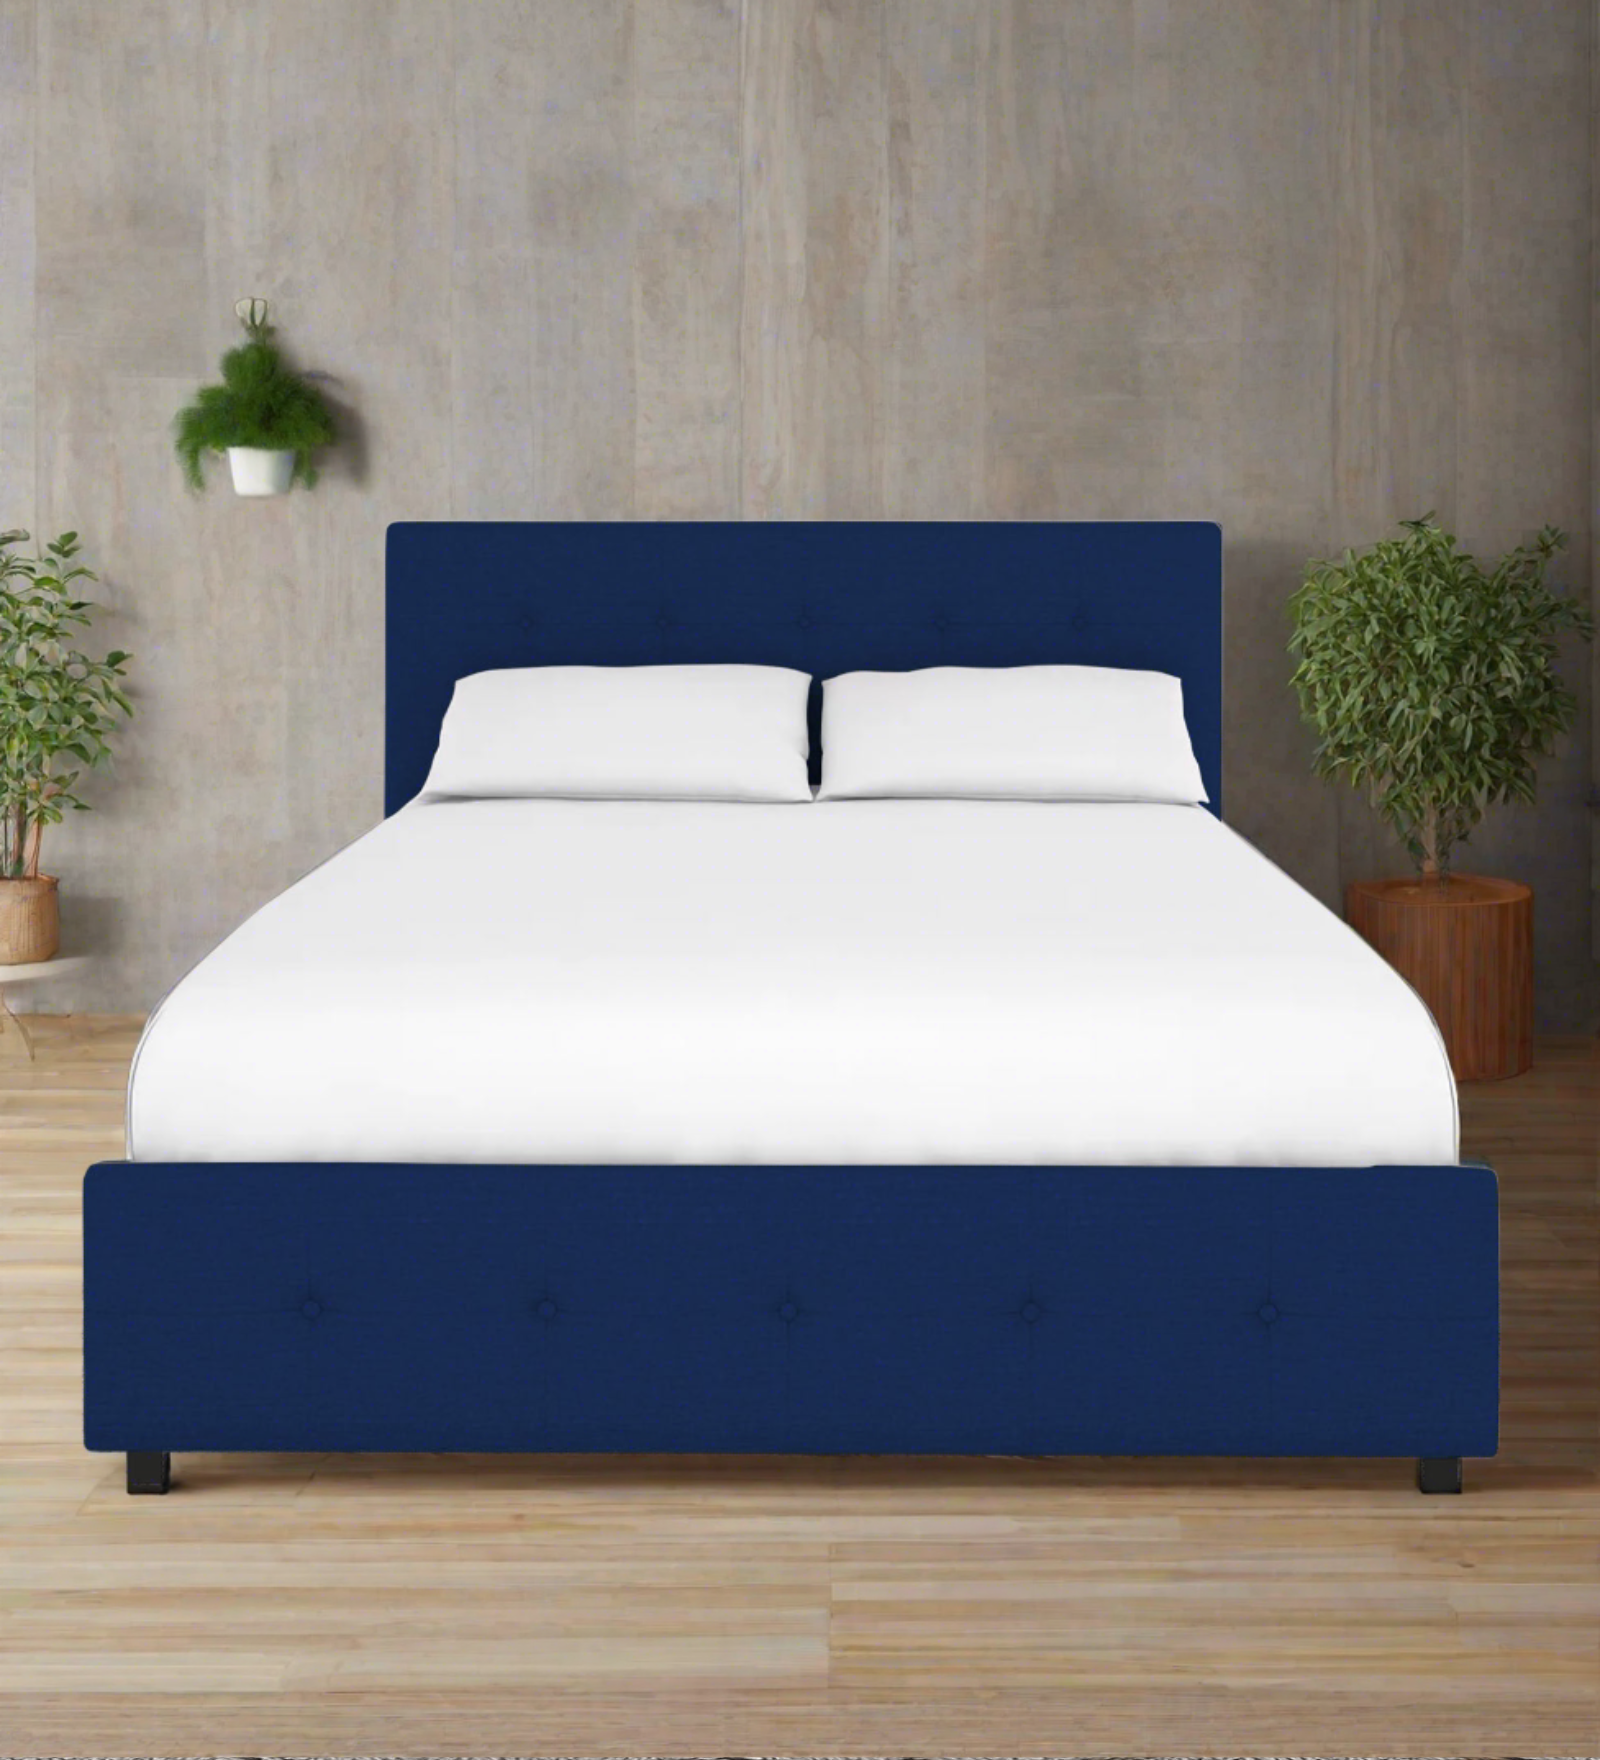 Lido Fabric Queen Size Bed In Royal Blue Colour With Storage